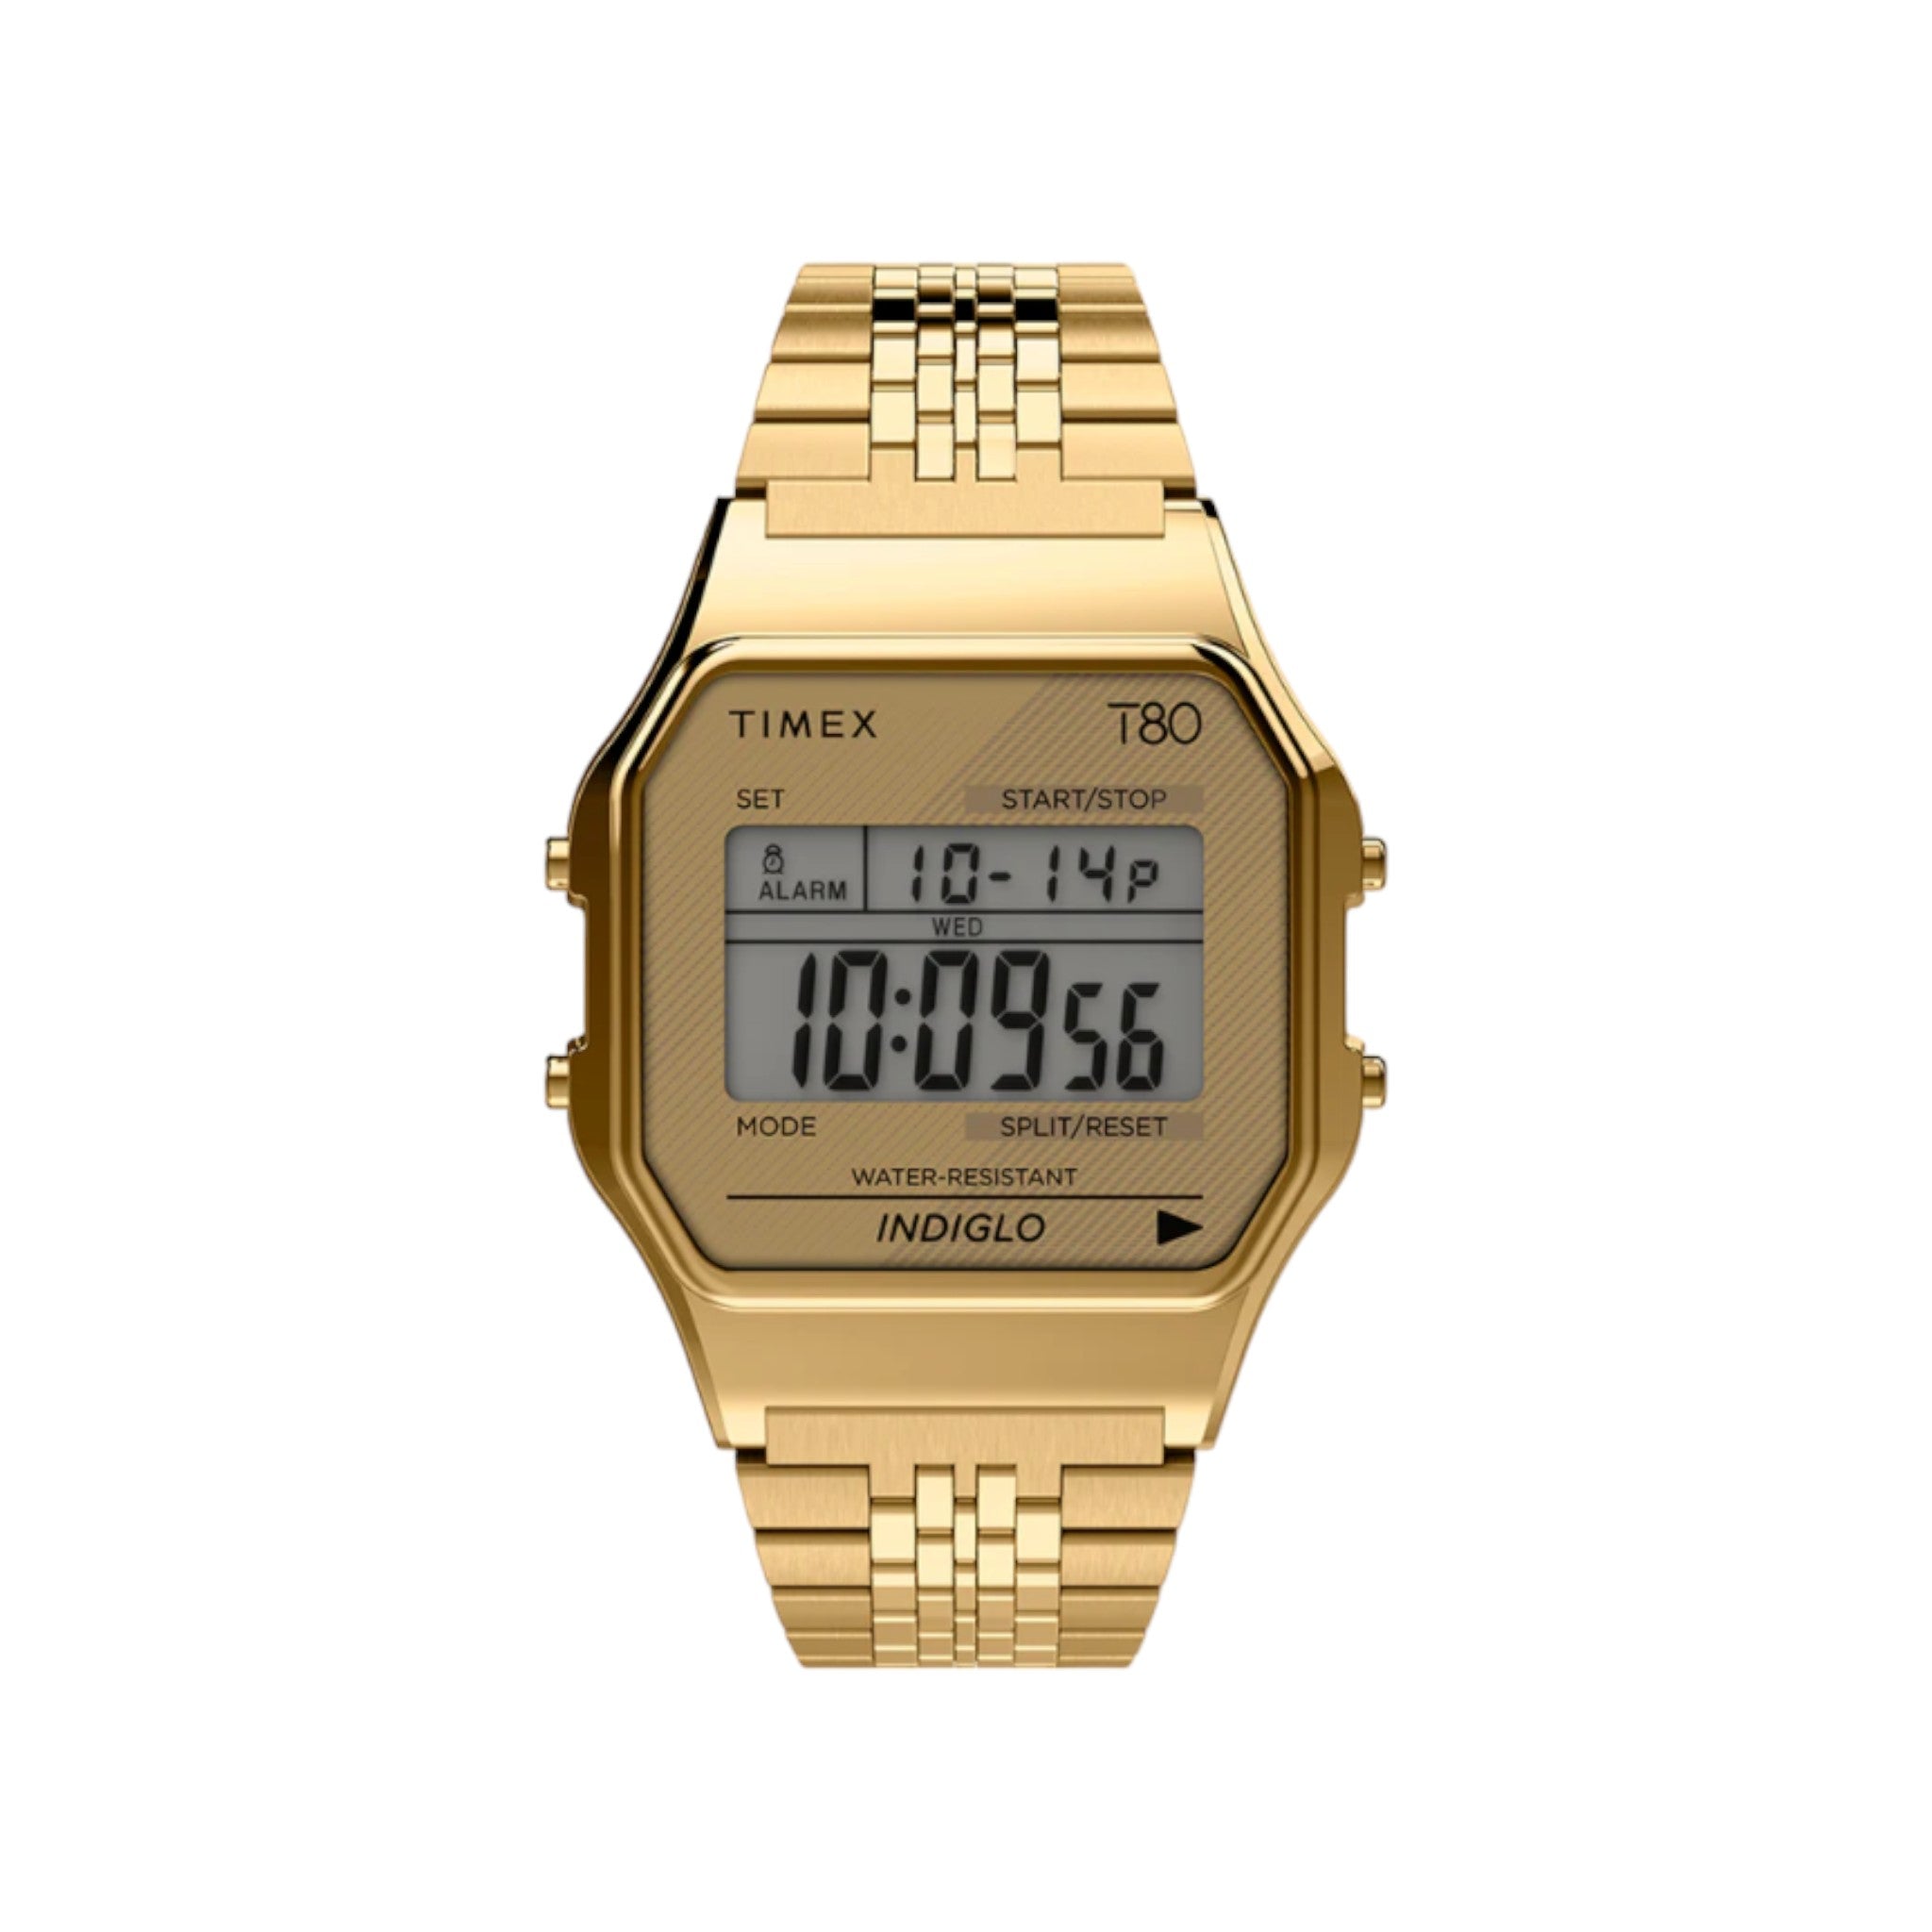 Timex - T80 34mm Stainless Steel Bracelet Watch - Gold Tone